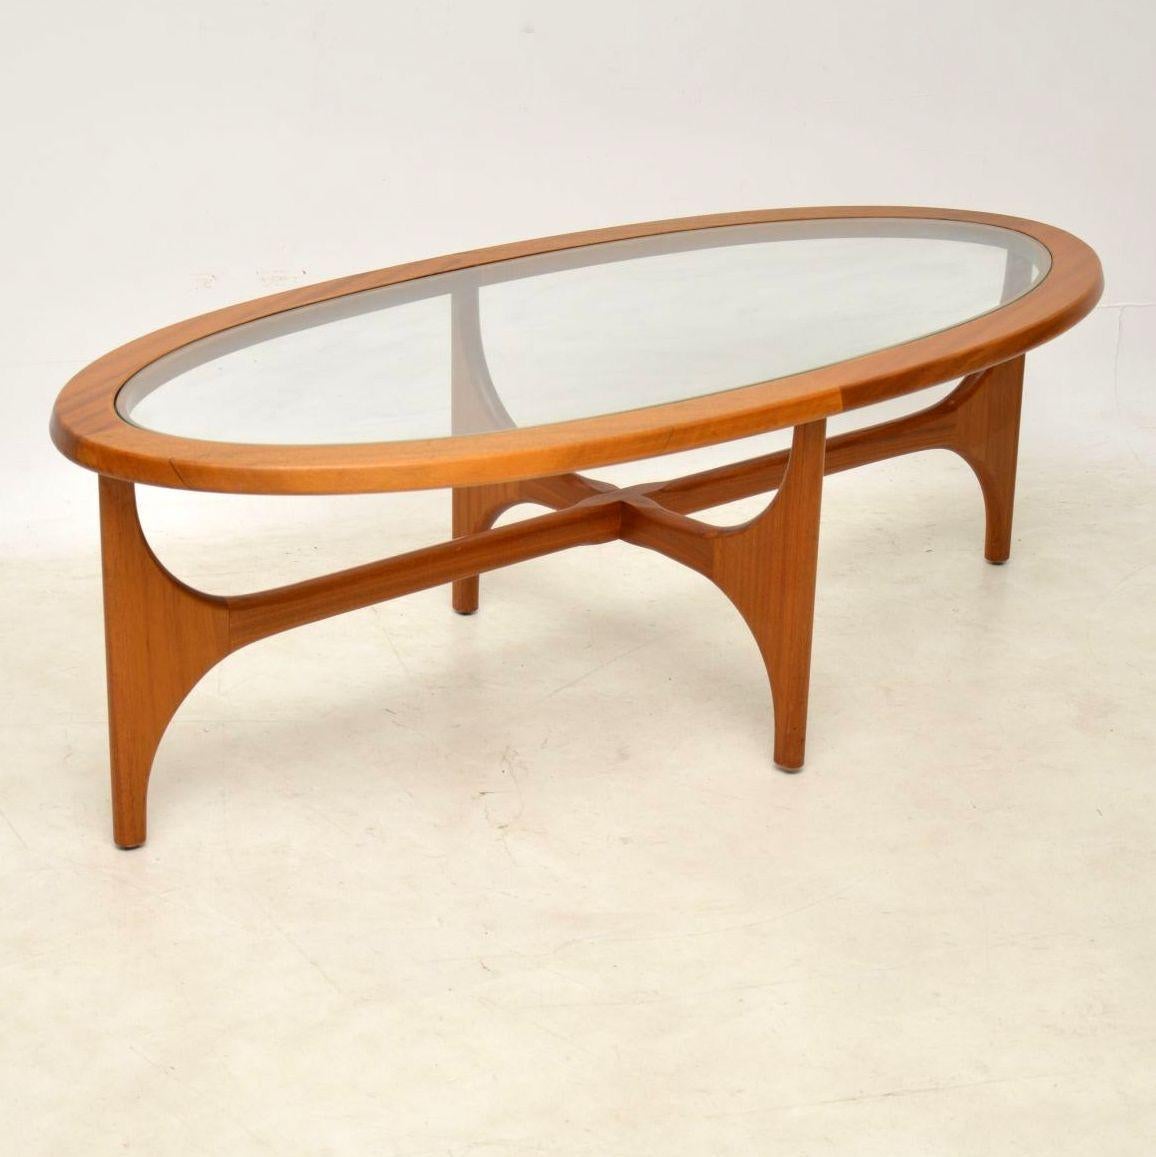 English 1960s Vintage Teak Coffee Table by Stonehill